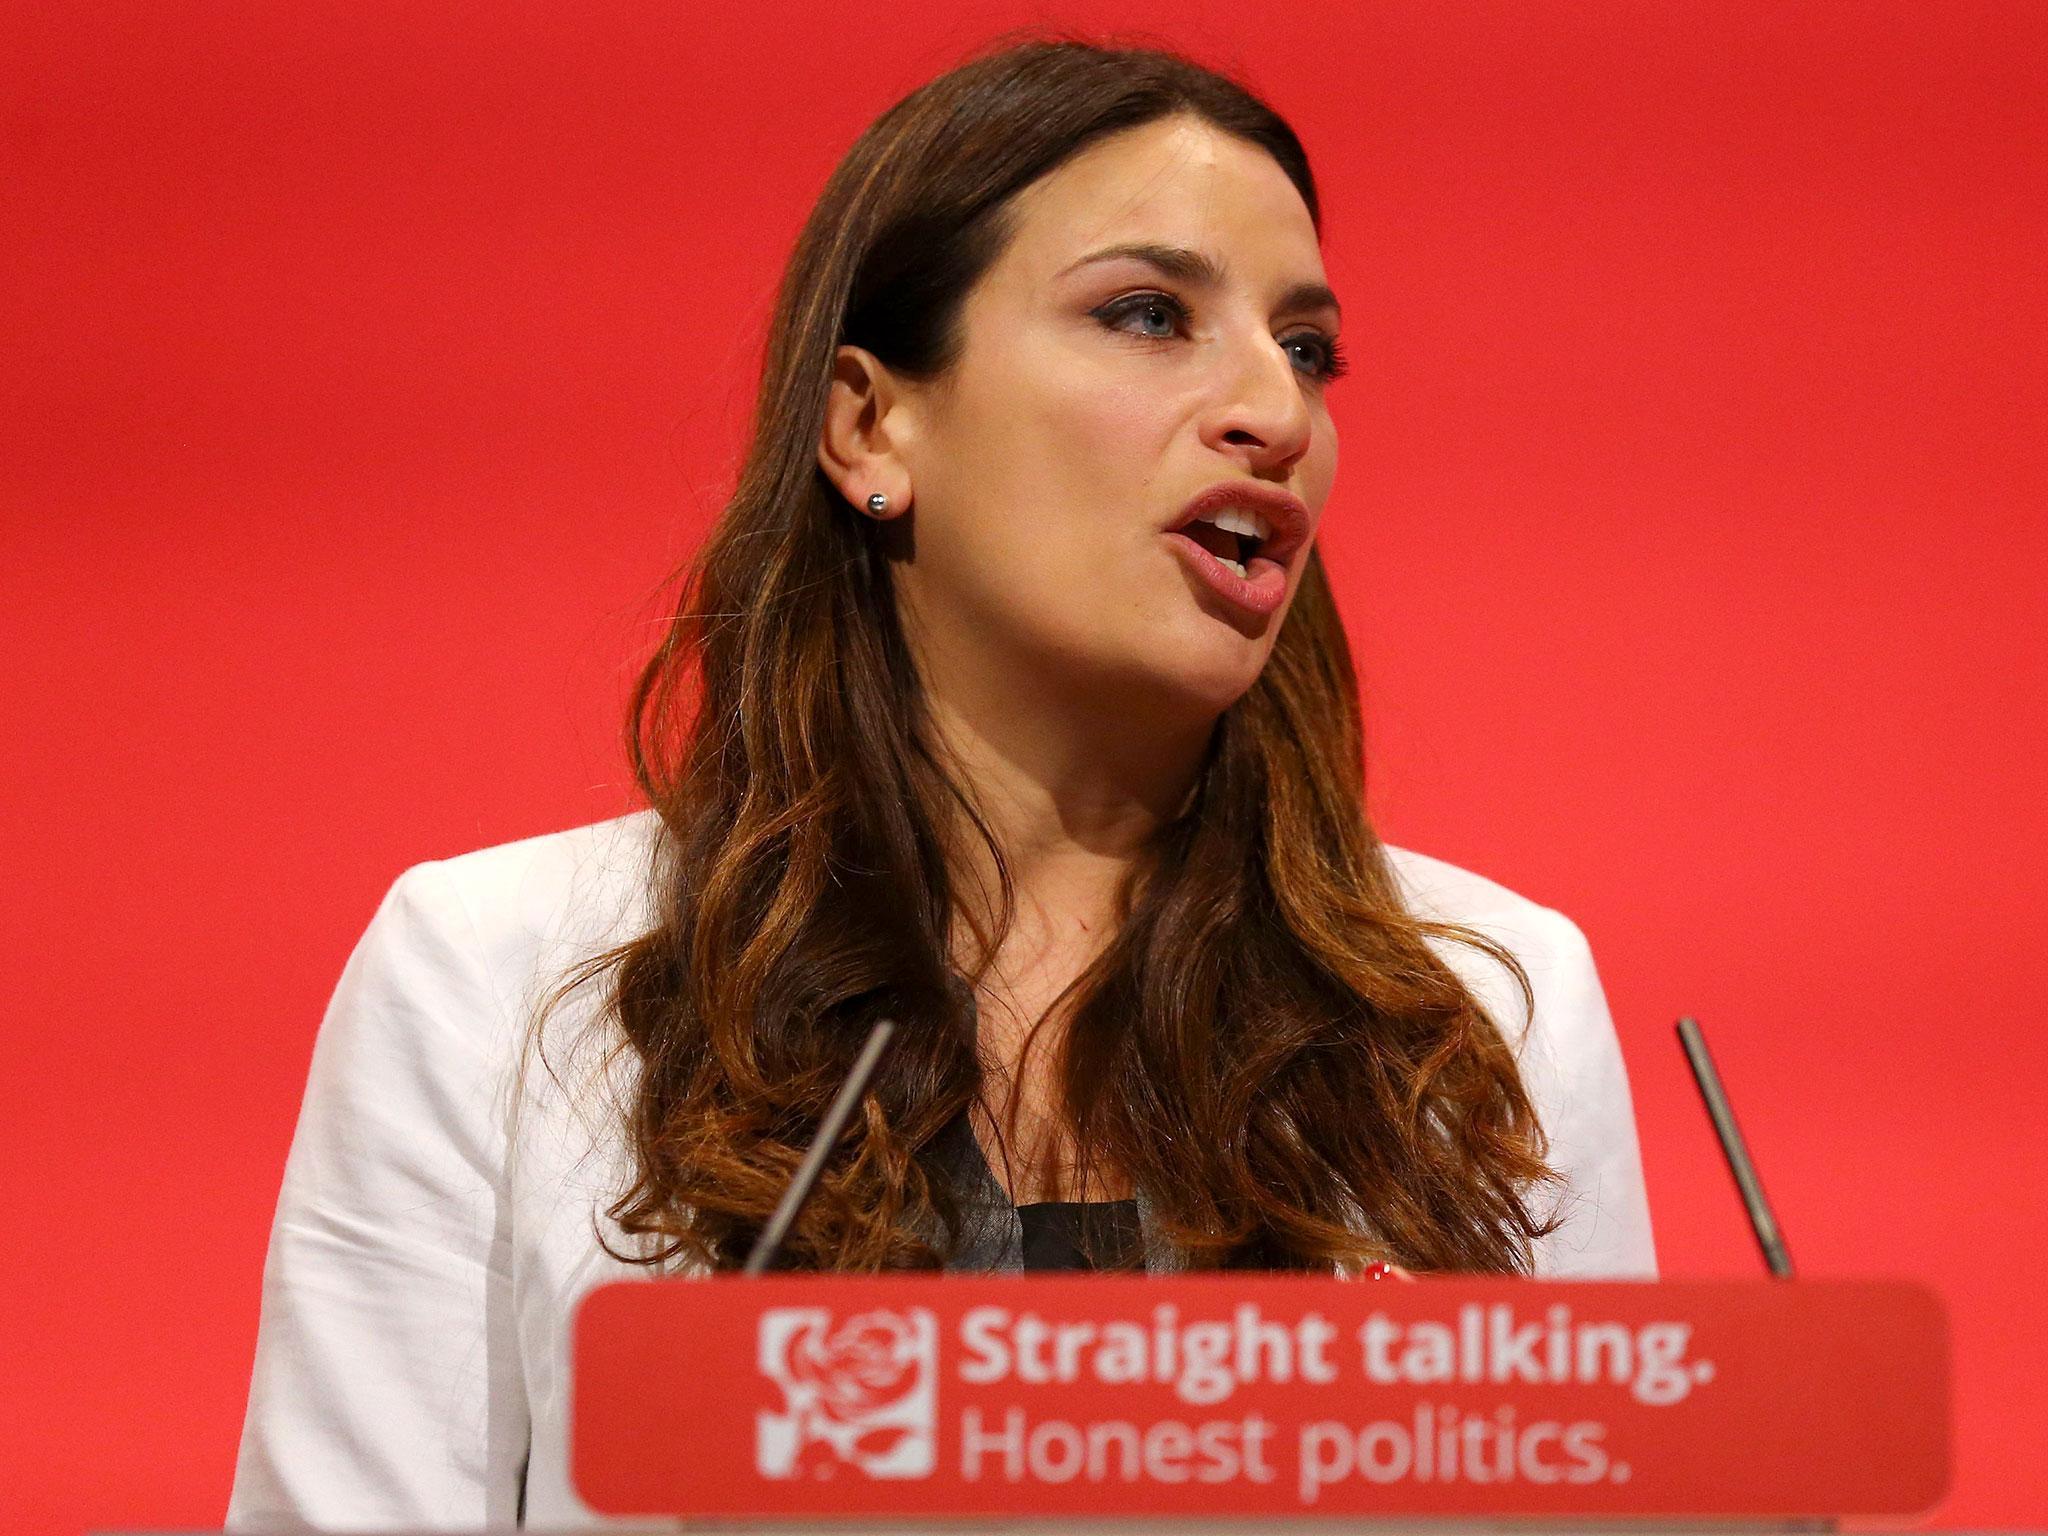 Labour MP Luciana Berger said Theresa May’s ‘cuts are harming mental health services’